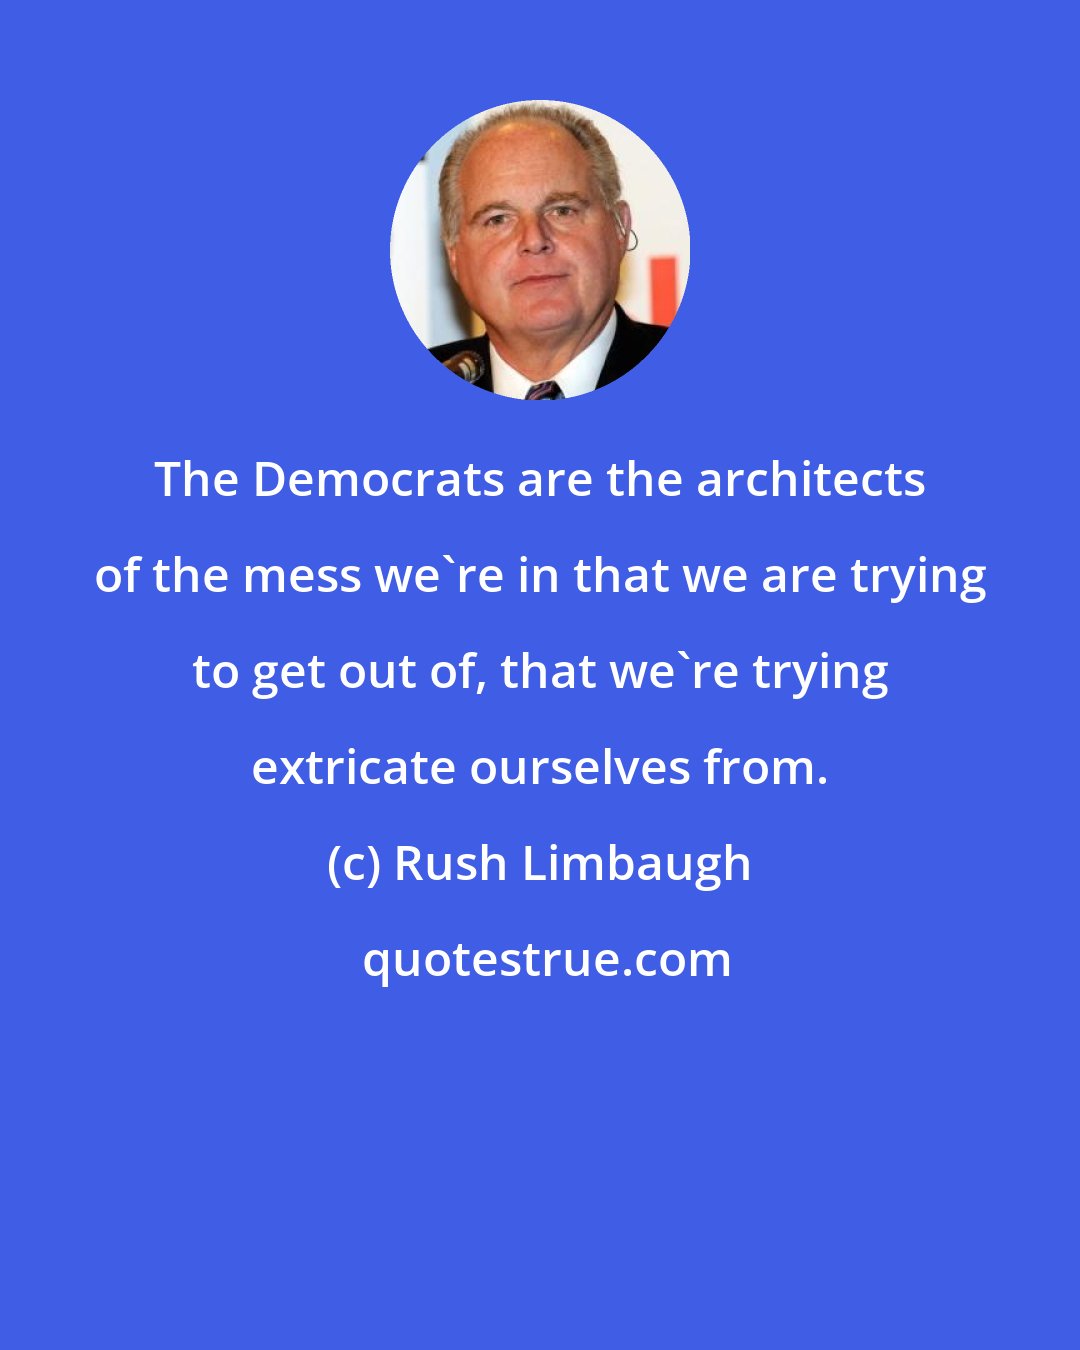 Rush Limbaugh: The Democrats are the architects of the mess we're in that we are trying to get out of, that we're trying extricate ourselves from.